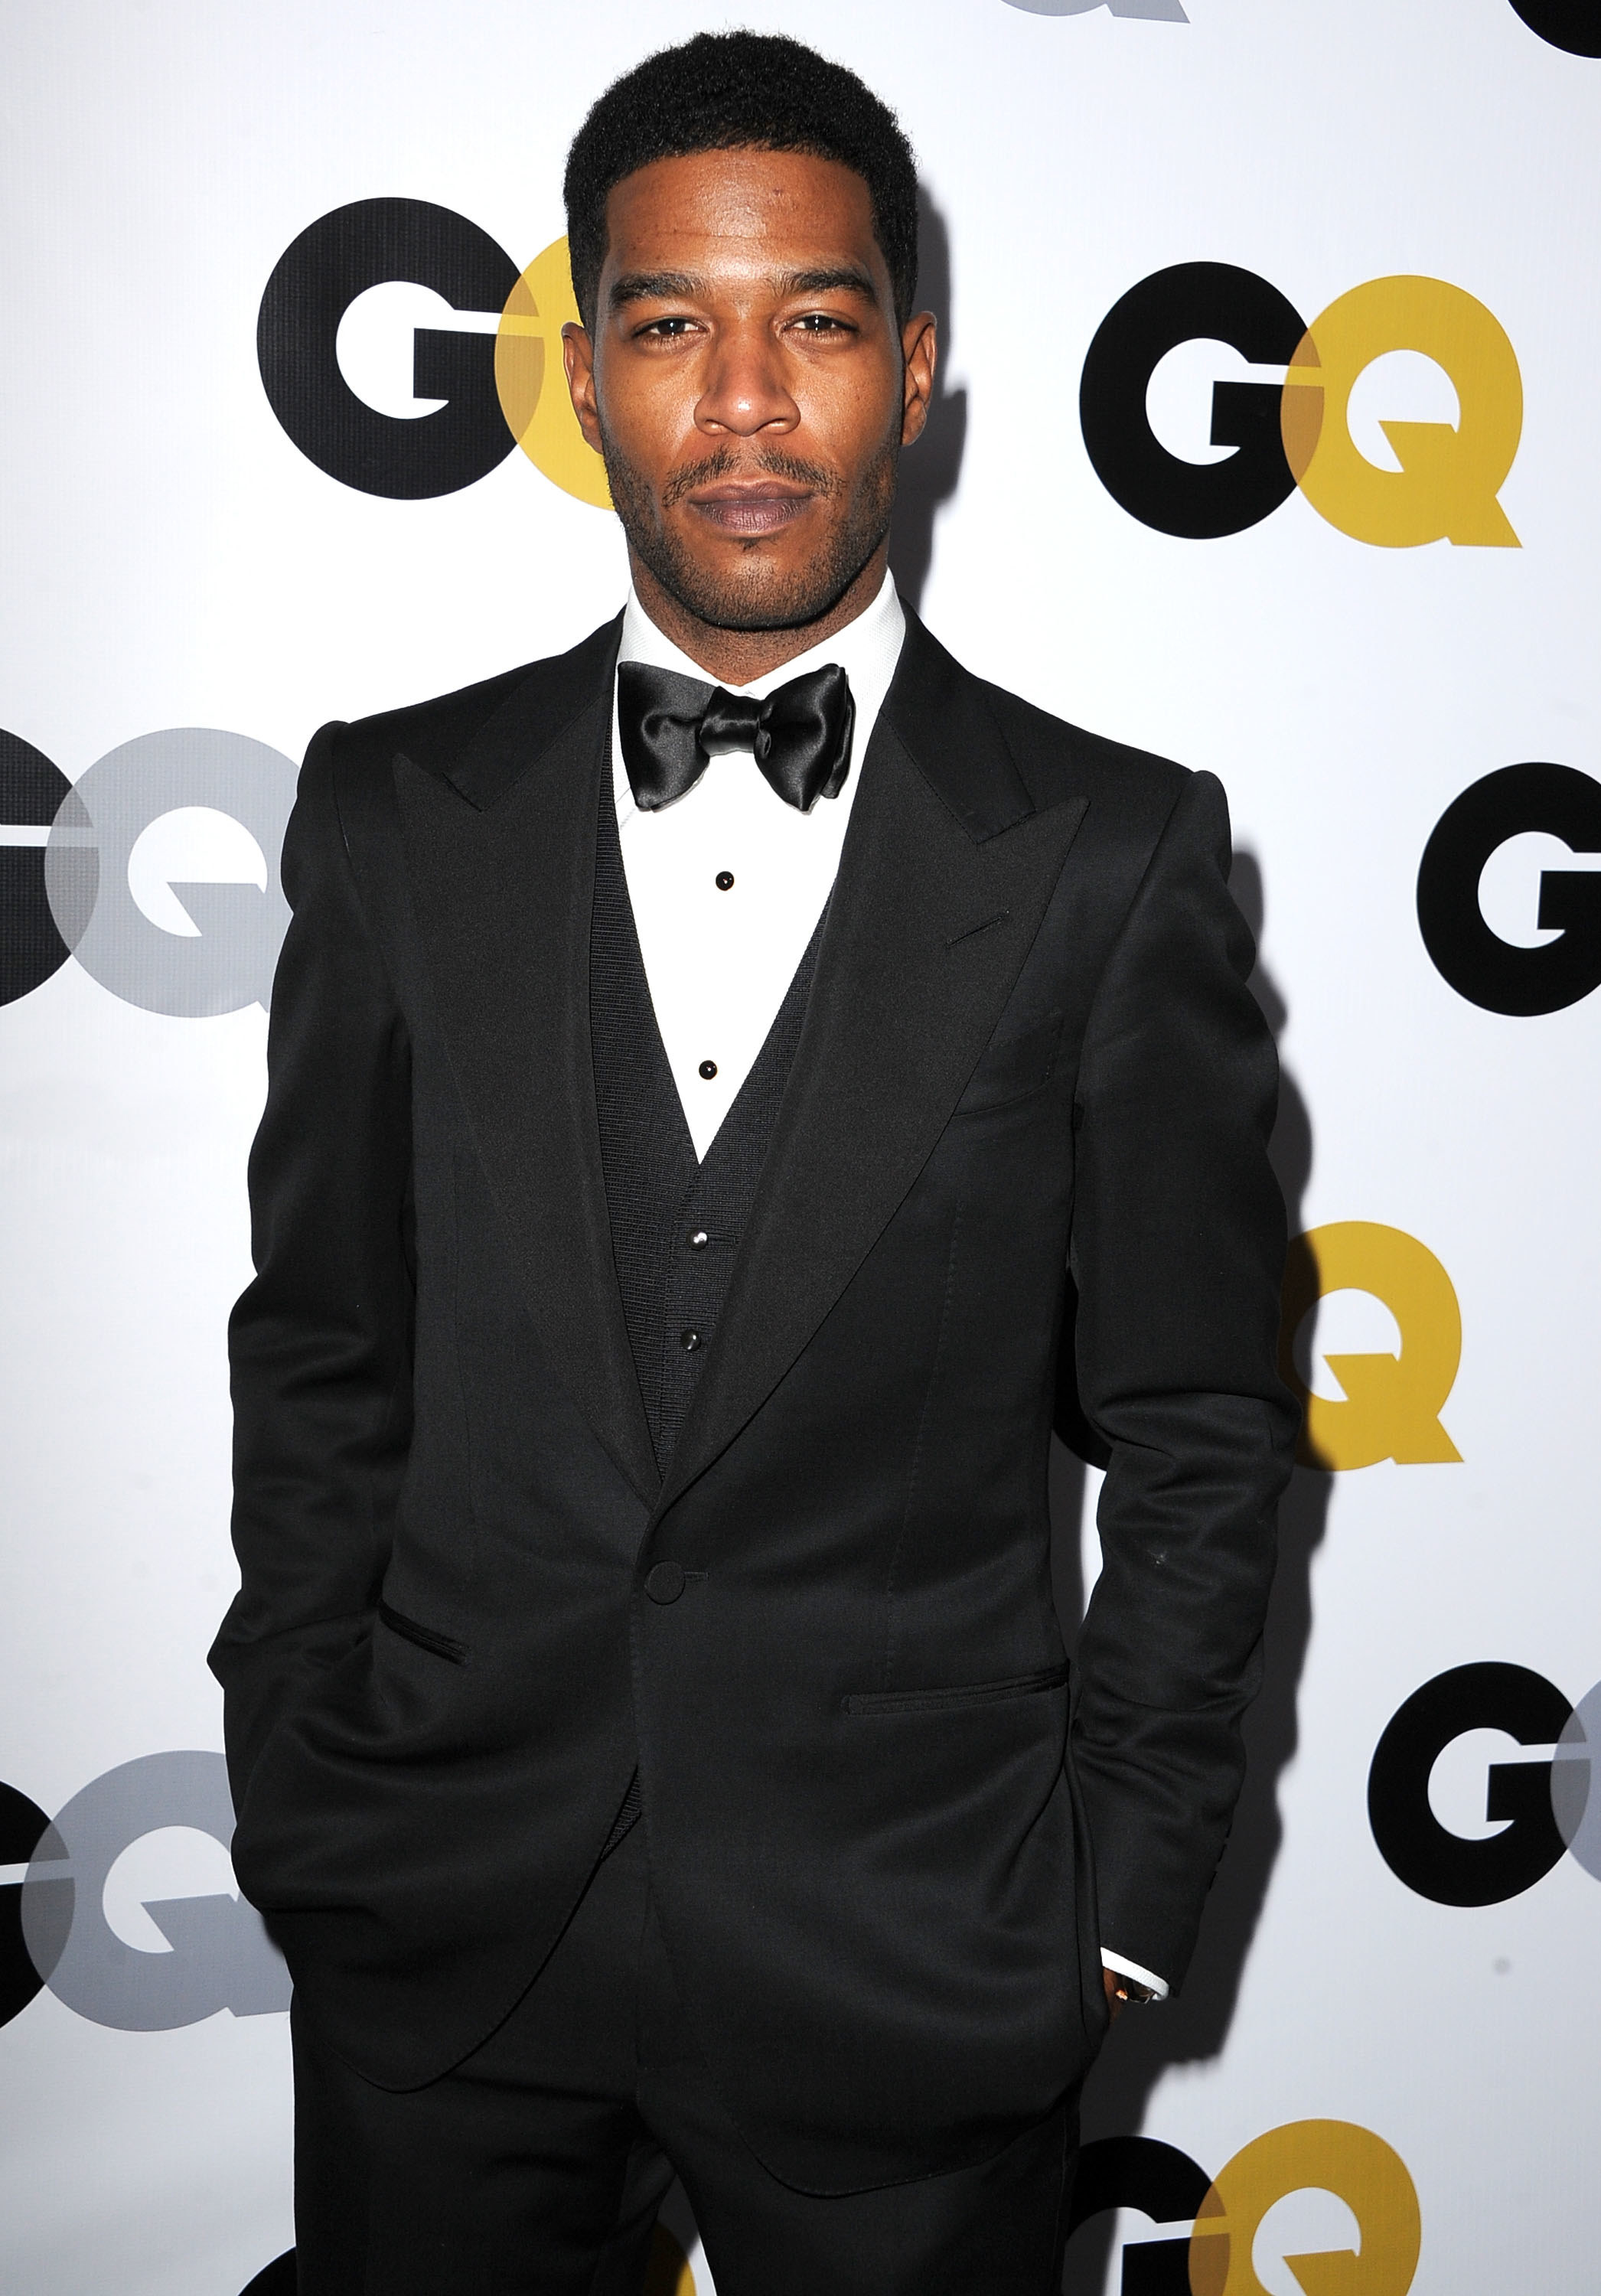 Kid Cudi is pictured at the GQ Men Of The Year Party in November 2013